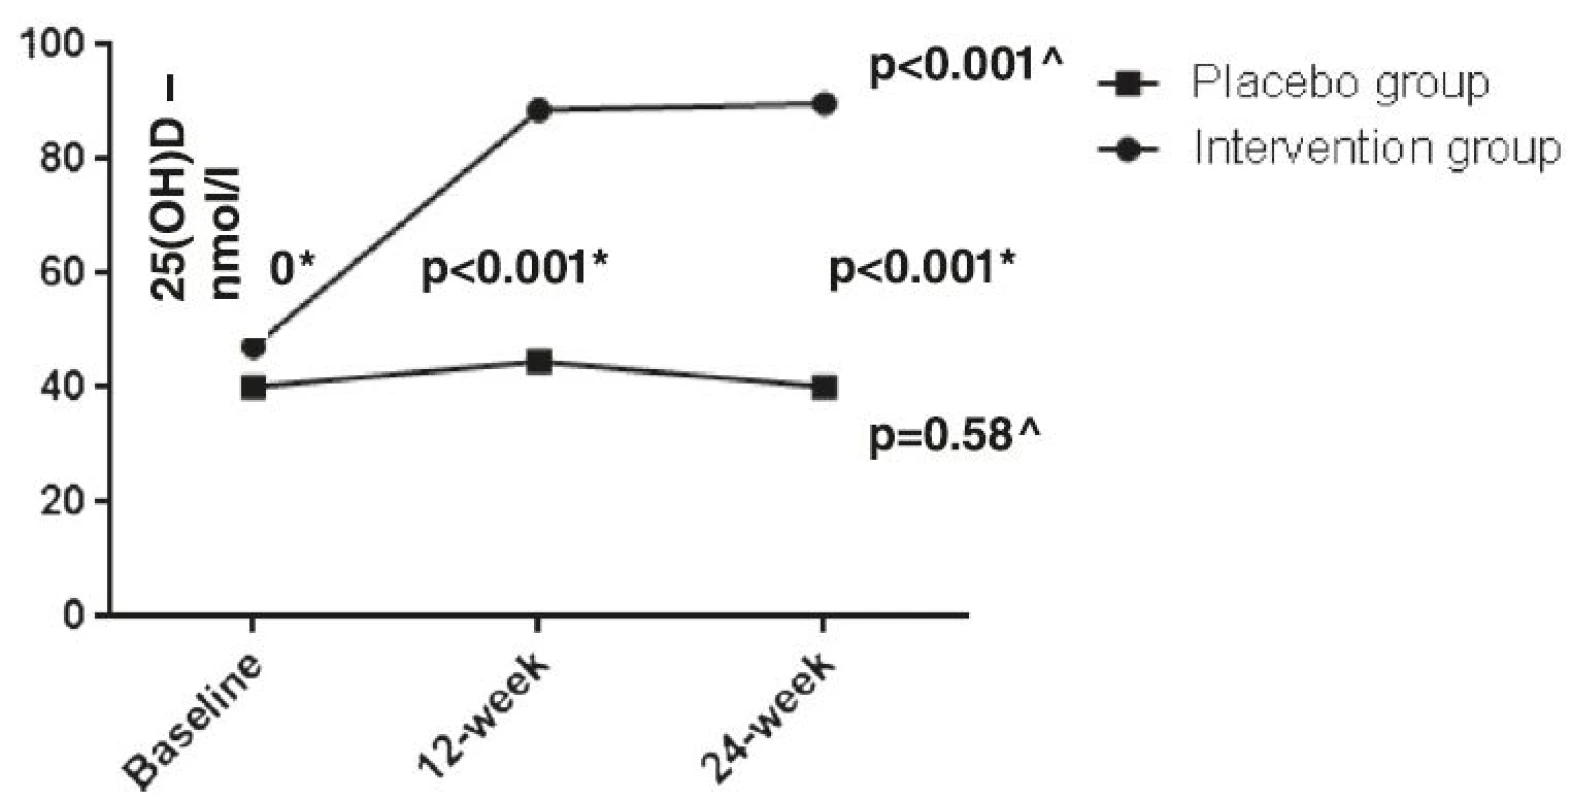 Serum 25(OH) D levels in intervention versus placebo group. * Independent samples U Mann–Whitney’s test; ^ Multiple dependent comparisons Friedman’s test